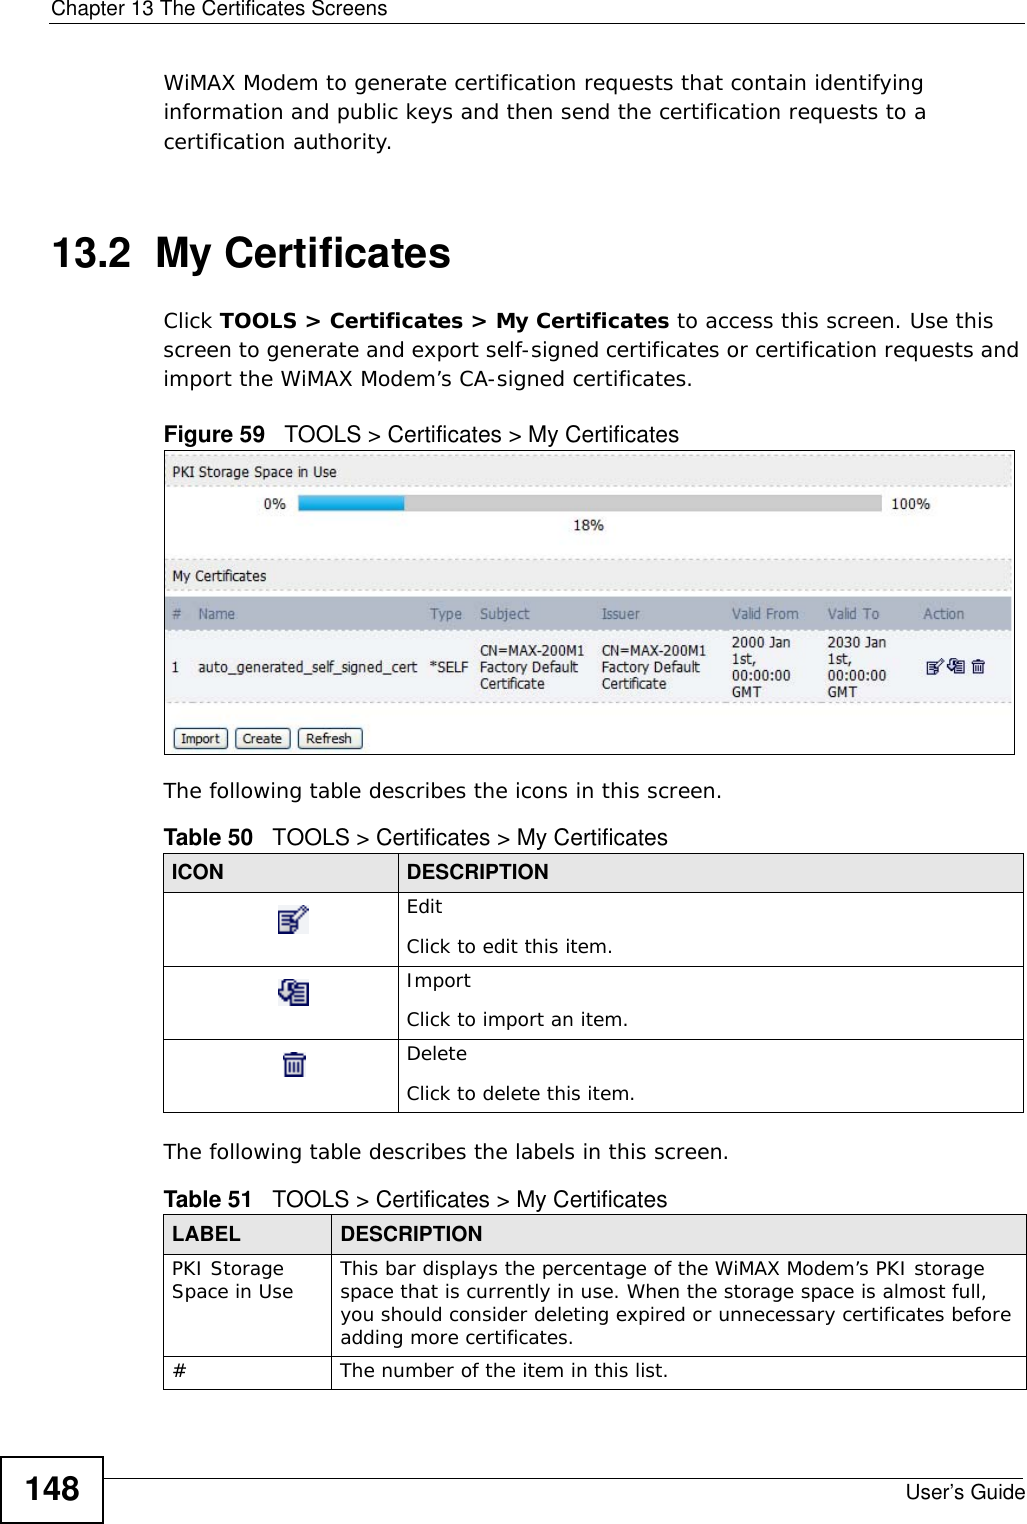 Chapter 13 The Certificates ScreensUser’s Guide148WiMAX Modem to generate certification requests that contain identifying information and public keys and then send the certification requests to a certification authority. 13.2  My CertificatesClick TOOLS &gt; Certificates &gt; My Certificates to access this screen. Use this screen to generate and export self-signed certificates or certification requests and import the WiMAX Modem’s CA-signed certificates.Figure 59   TOOLS &gt; Certificates &gt; My Certificates      The following table describes the icons in this screen.The following table describes the labels in this screen. Table 50   TOOLS &gt; Certificates &gt; My CertificatesICON DESCRIPTIONEditClick to edit this item.ImportClick to import an item.DeleteClick to delete this item.Table 51   TOOLS &gt; Certificates &gt; My CertificatesLABEL DESCRIPTIONPKI Storage Space in Use This bar displays the percentage of the WiMAX Modem’s PKI storage space that is currently in use. When the storage space is almost full, you should consider deleting expired or unnecessary certificates before adding more certificates.# The number of the item in this list.